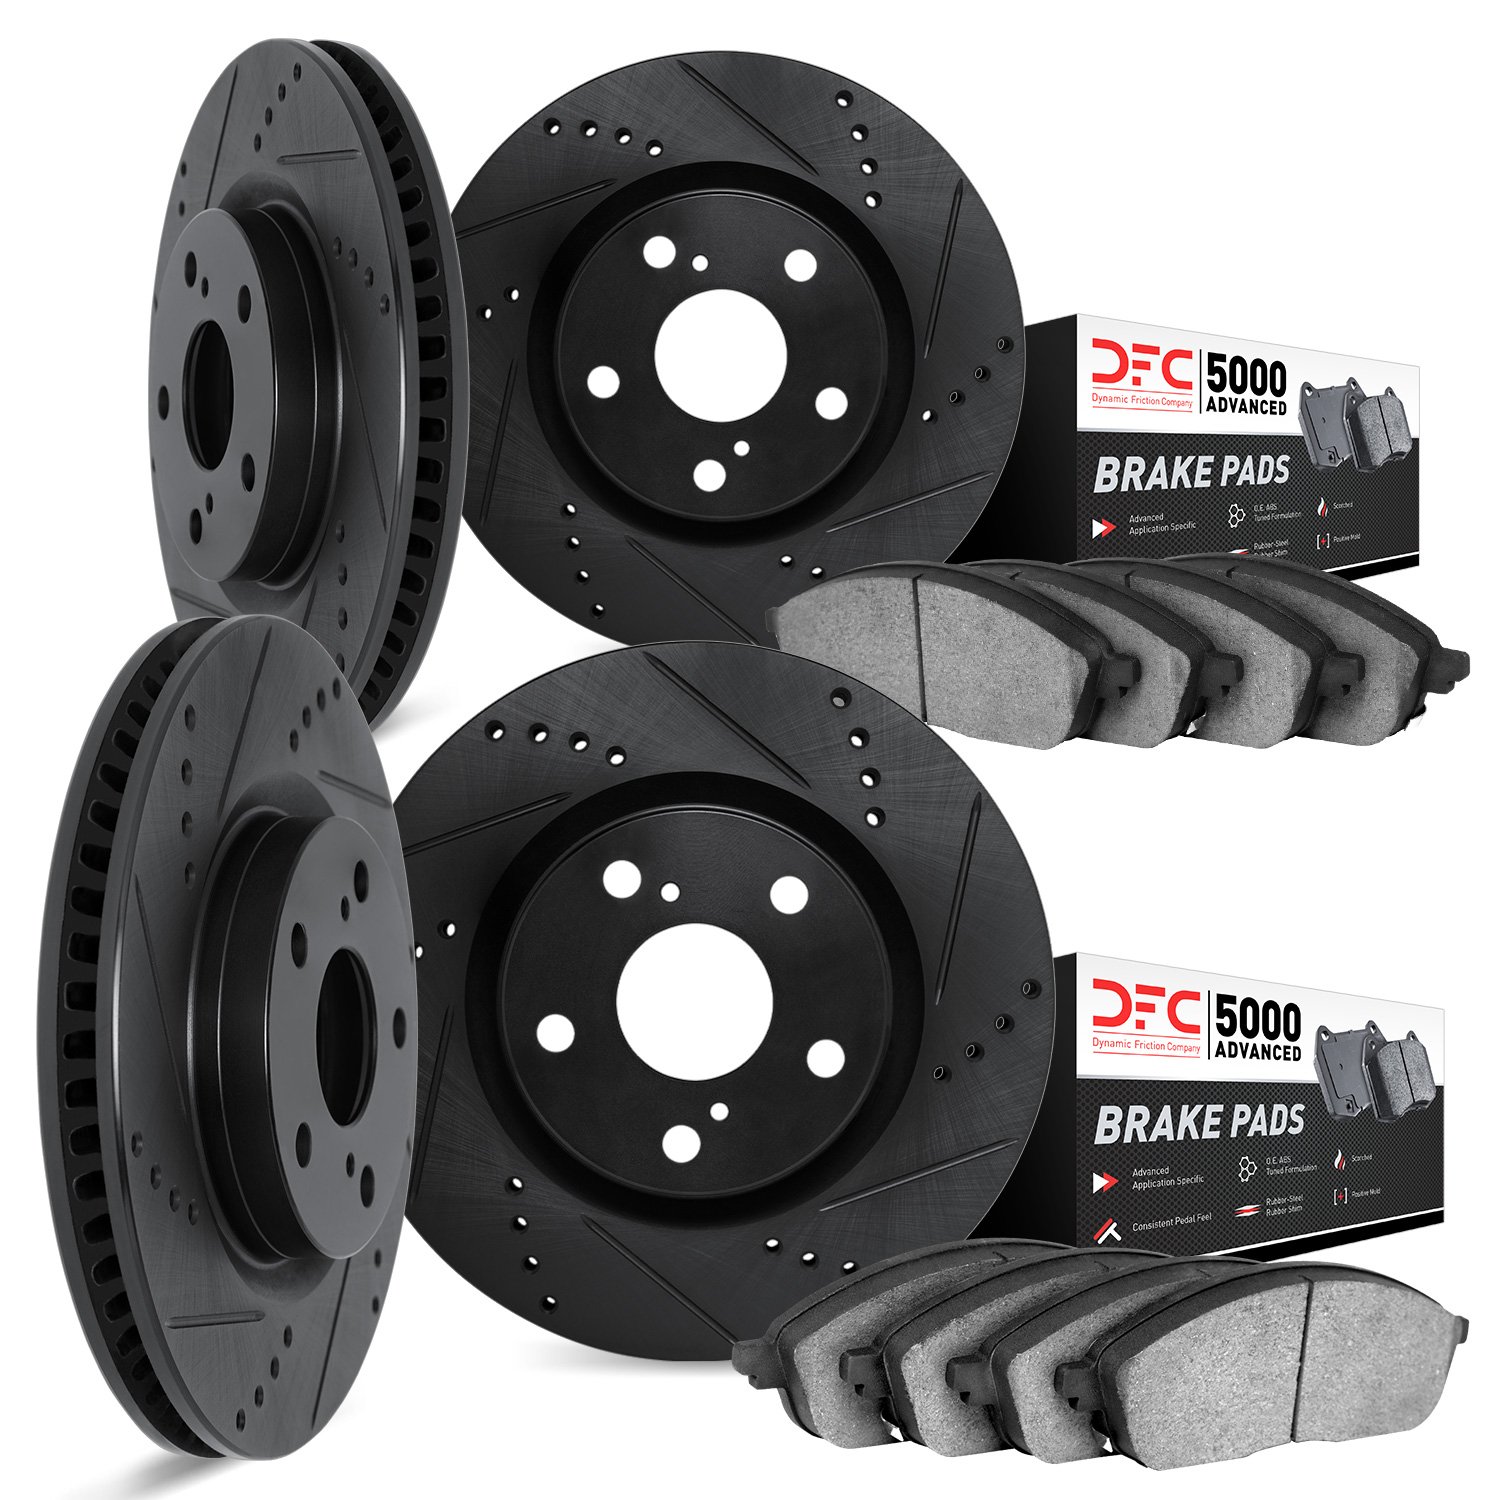 8504-31073 Drilled/Slotted Brake Rotors w/5000 Advanced Brake Pads Kit [Black], 2008-2014 BMW, Position: Front and Rear